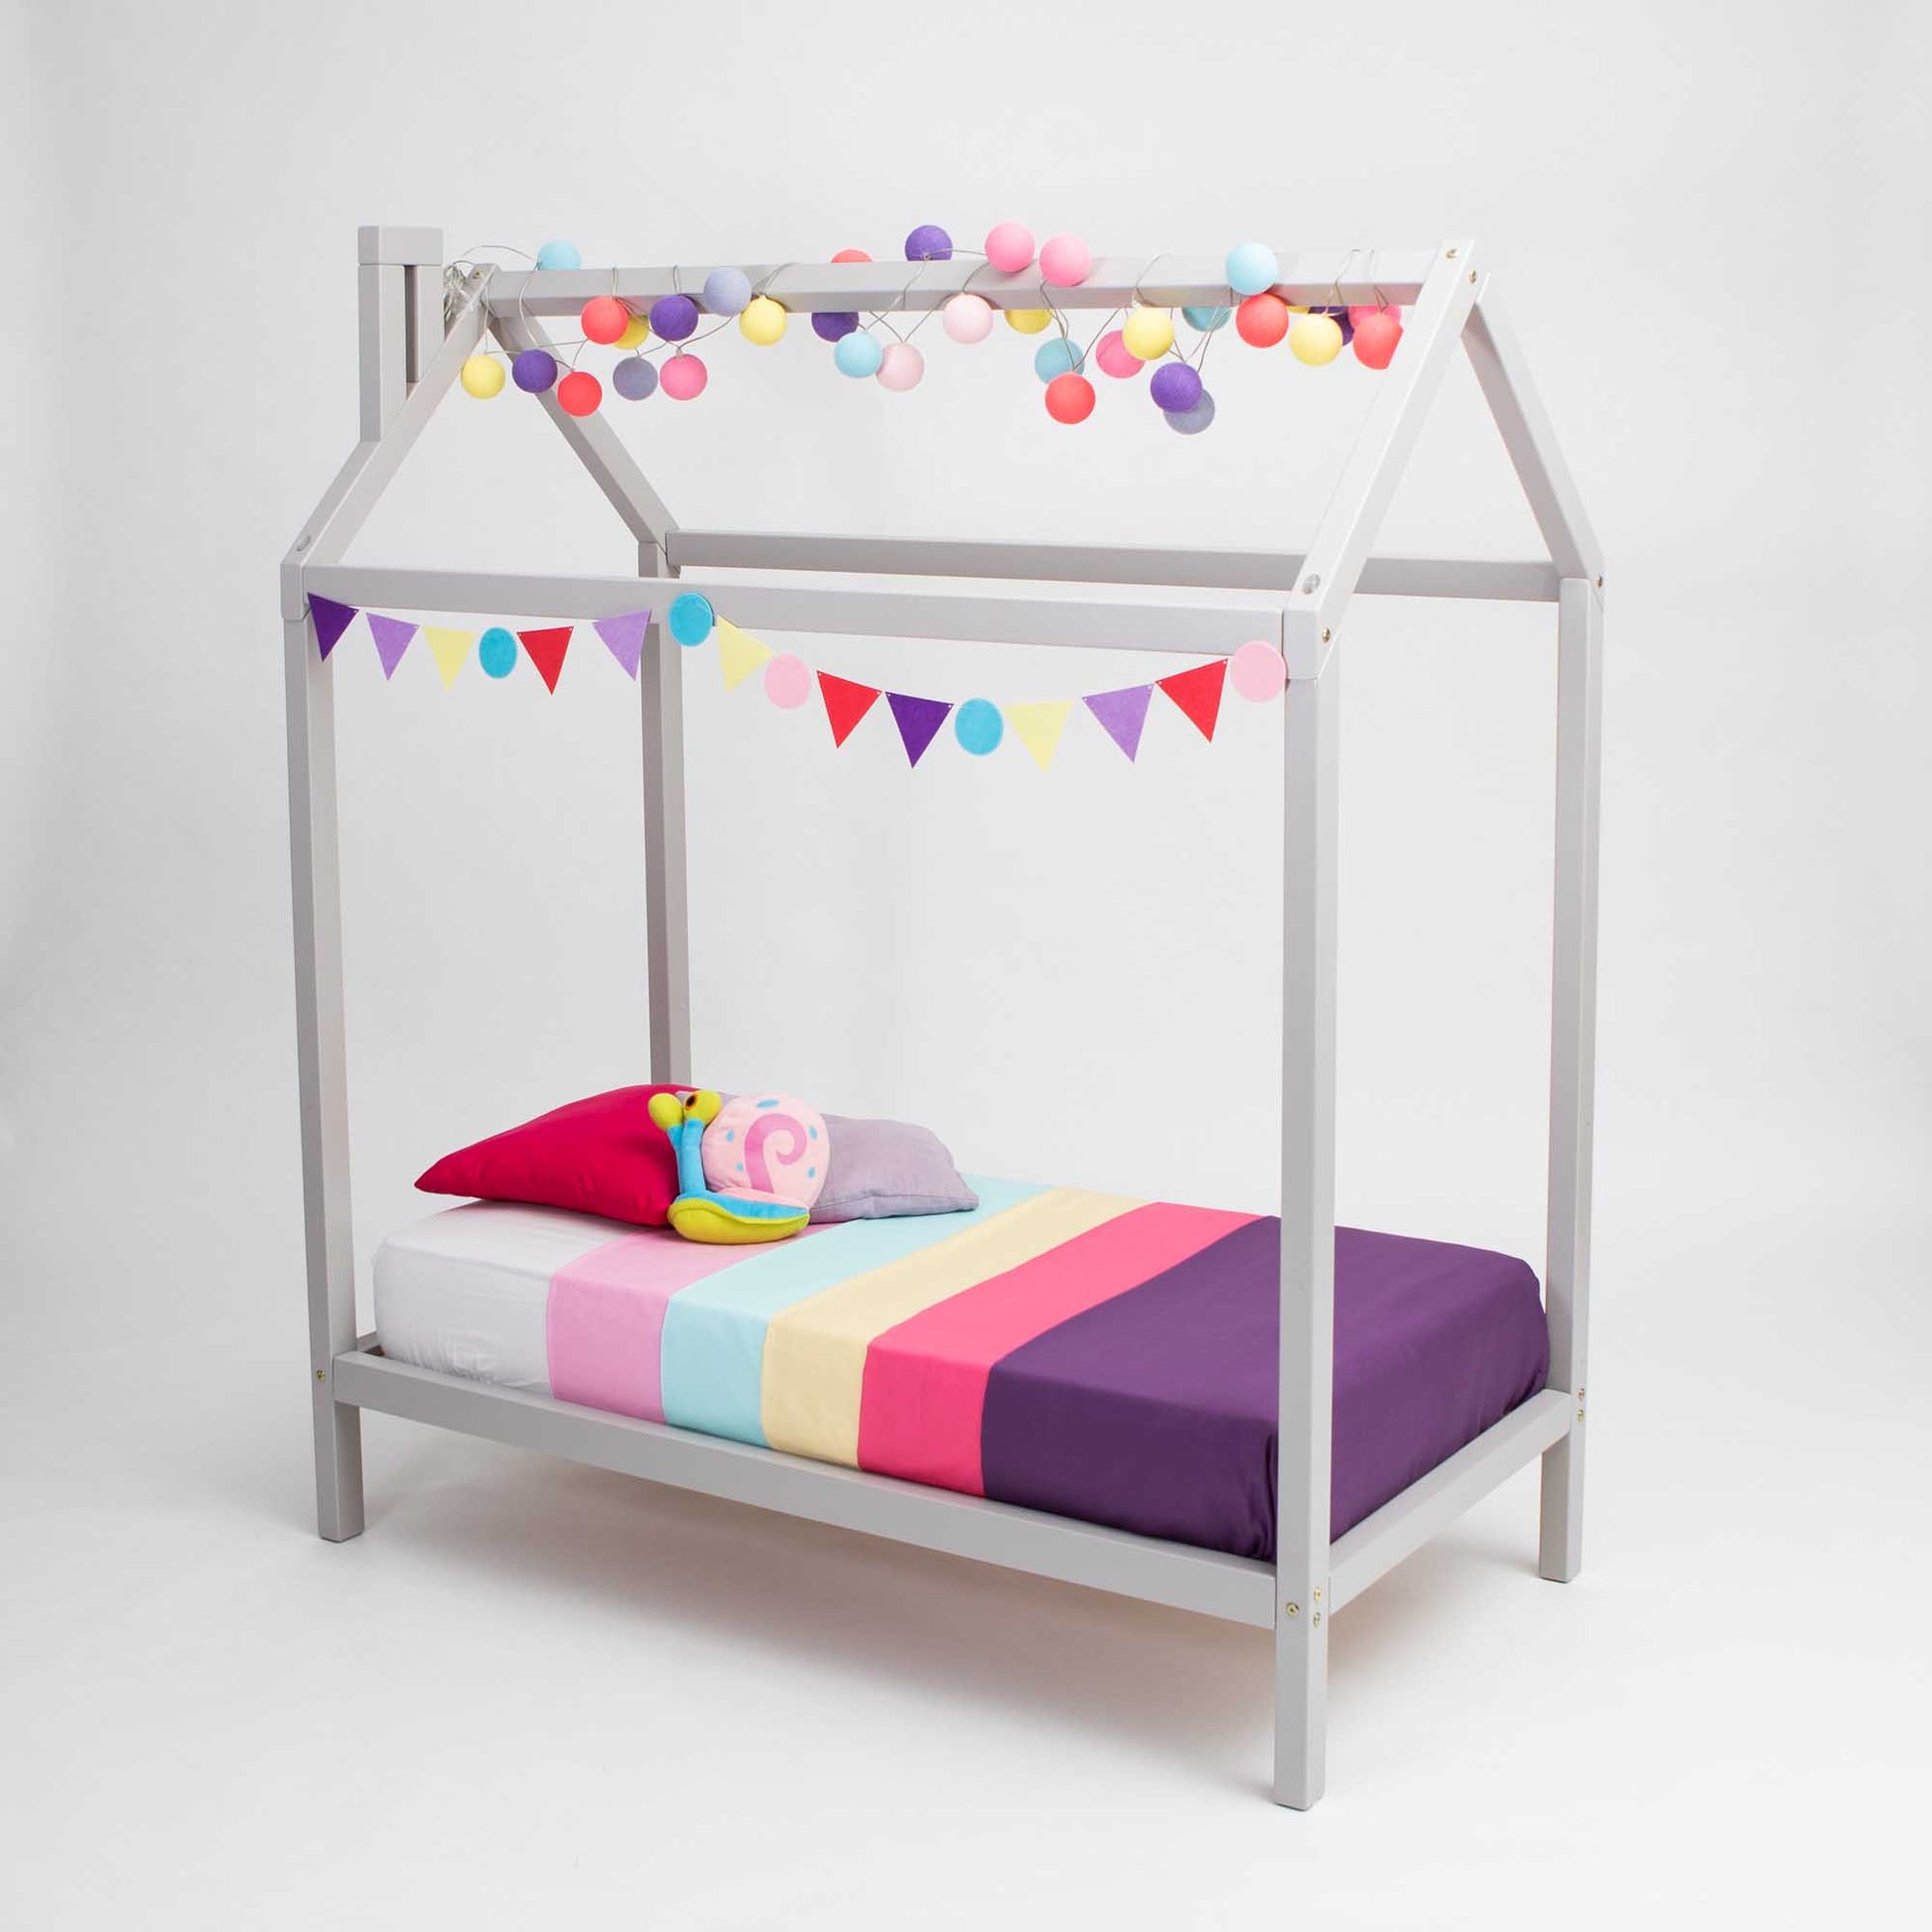 A wooden house bed on legs with pom poms and a colorful bed sheet.